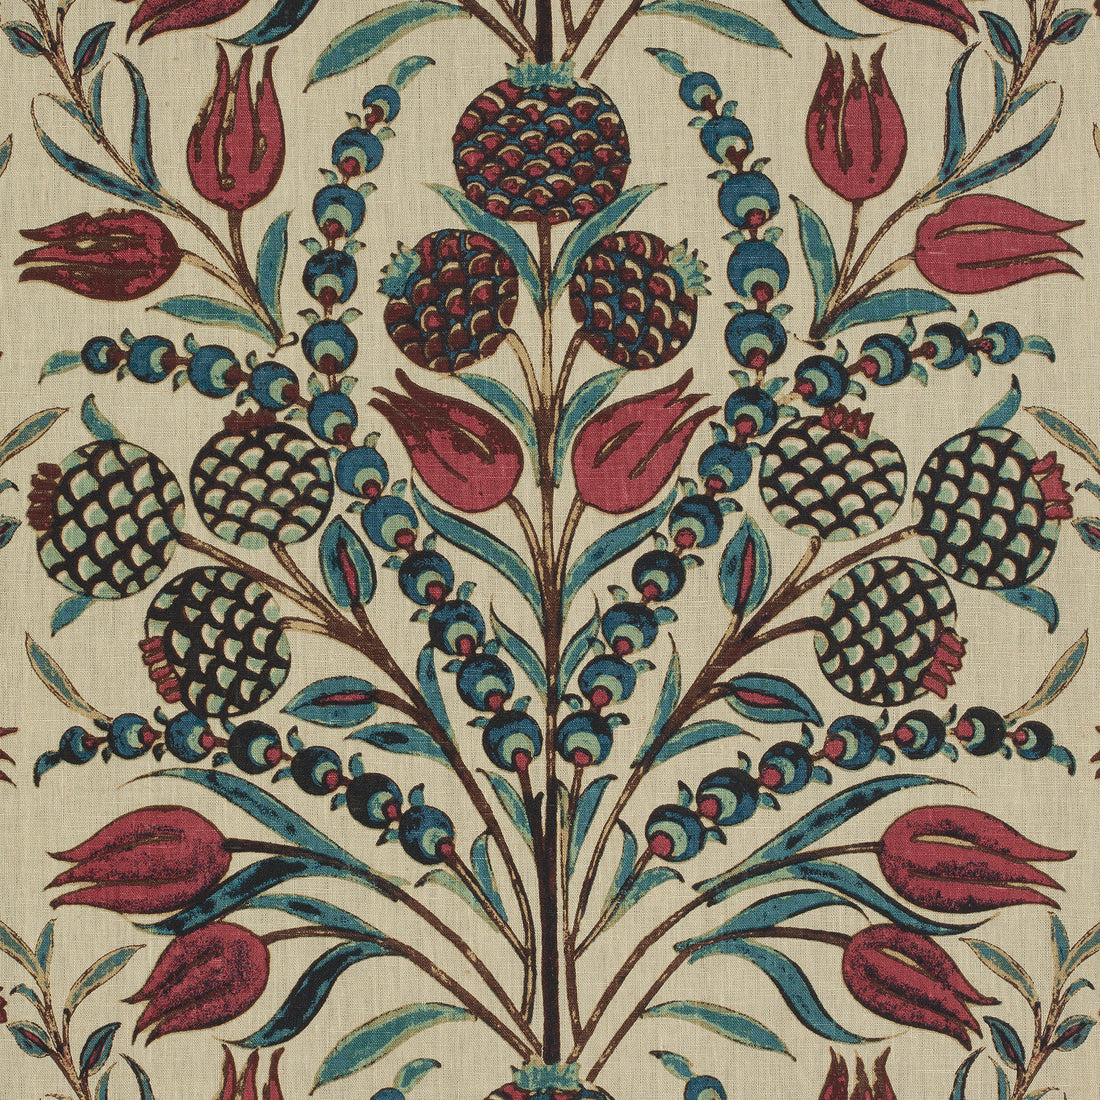 Corneila fabric in red and teal color - pattern number F972601 - by Thibaut in the Chestnut Hill collection